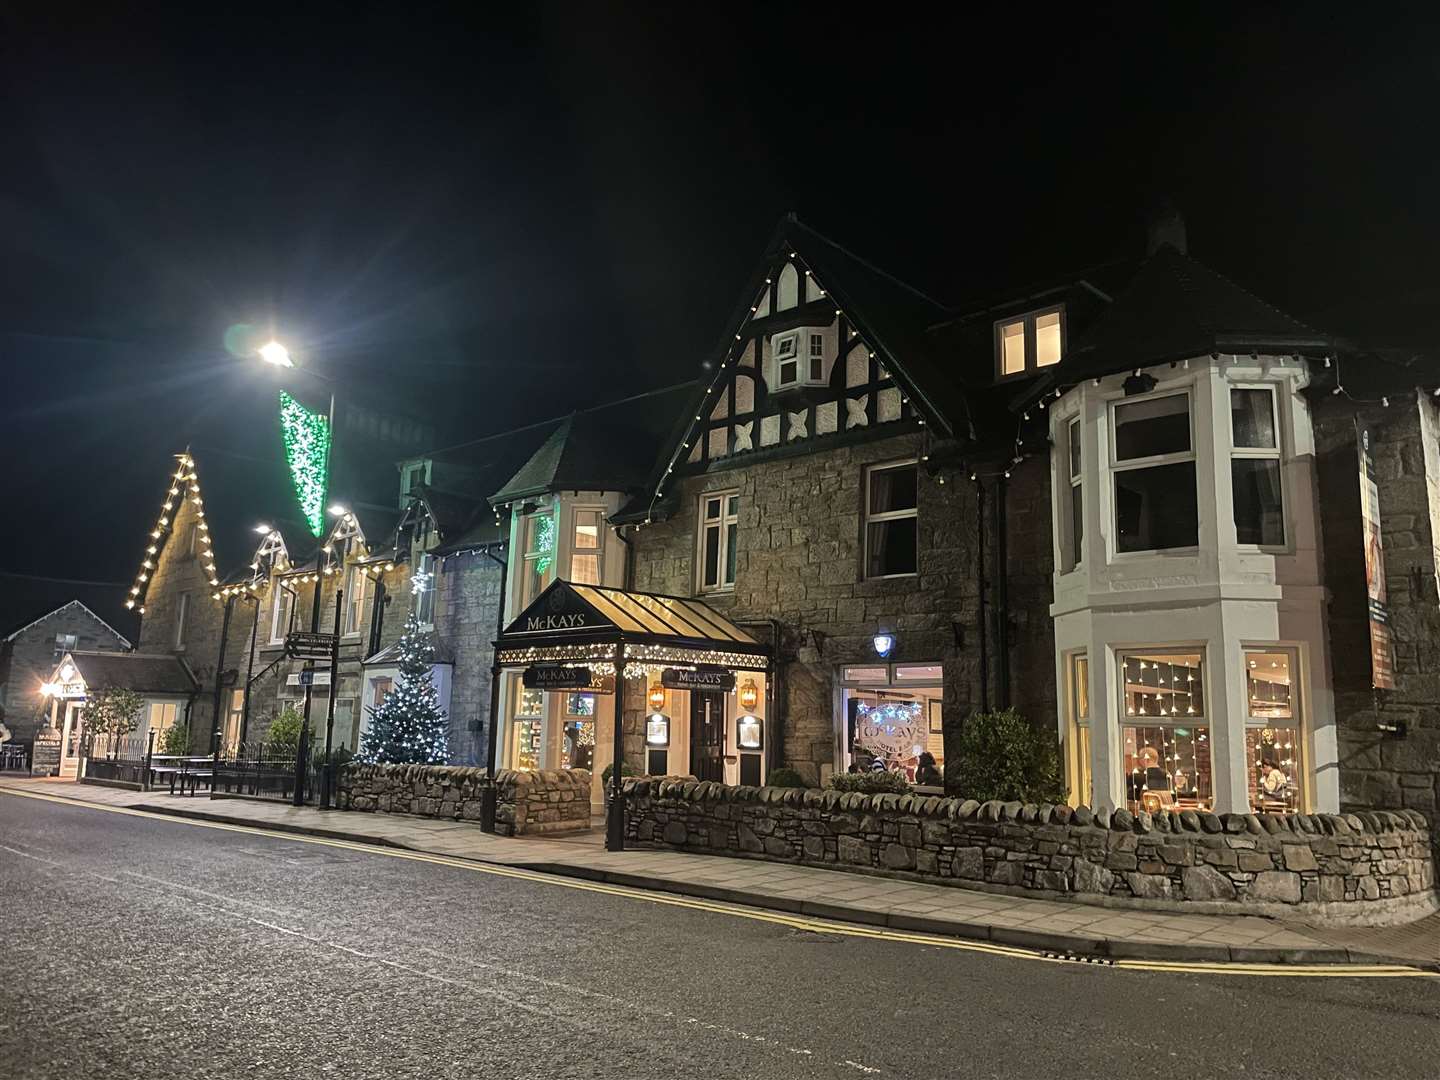 The McKay's Hotel in Pitlochry is the perfect base for a winter retreat.